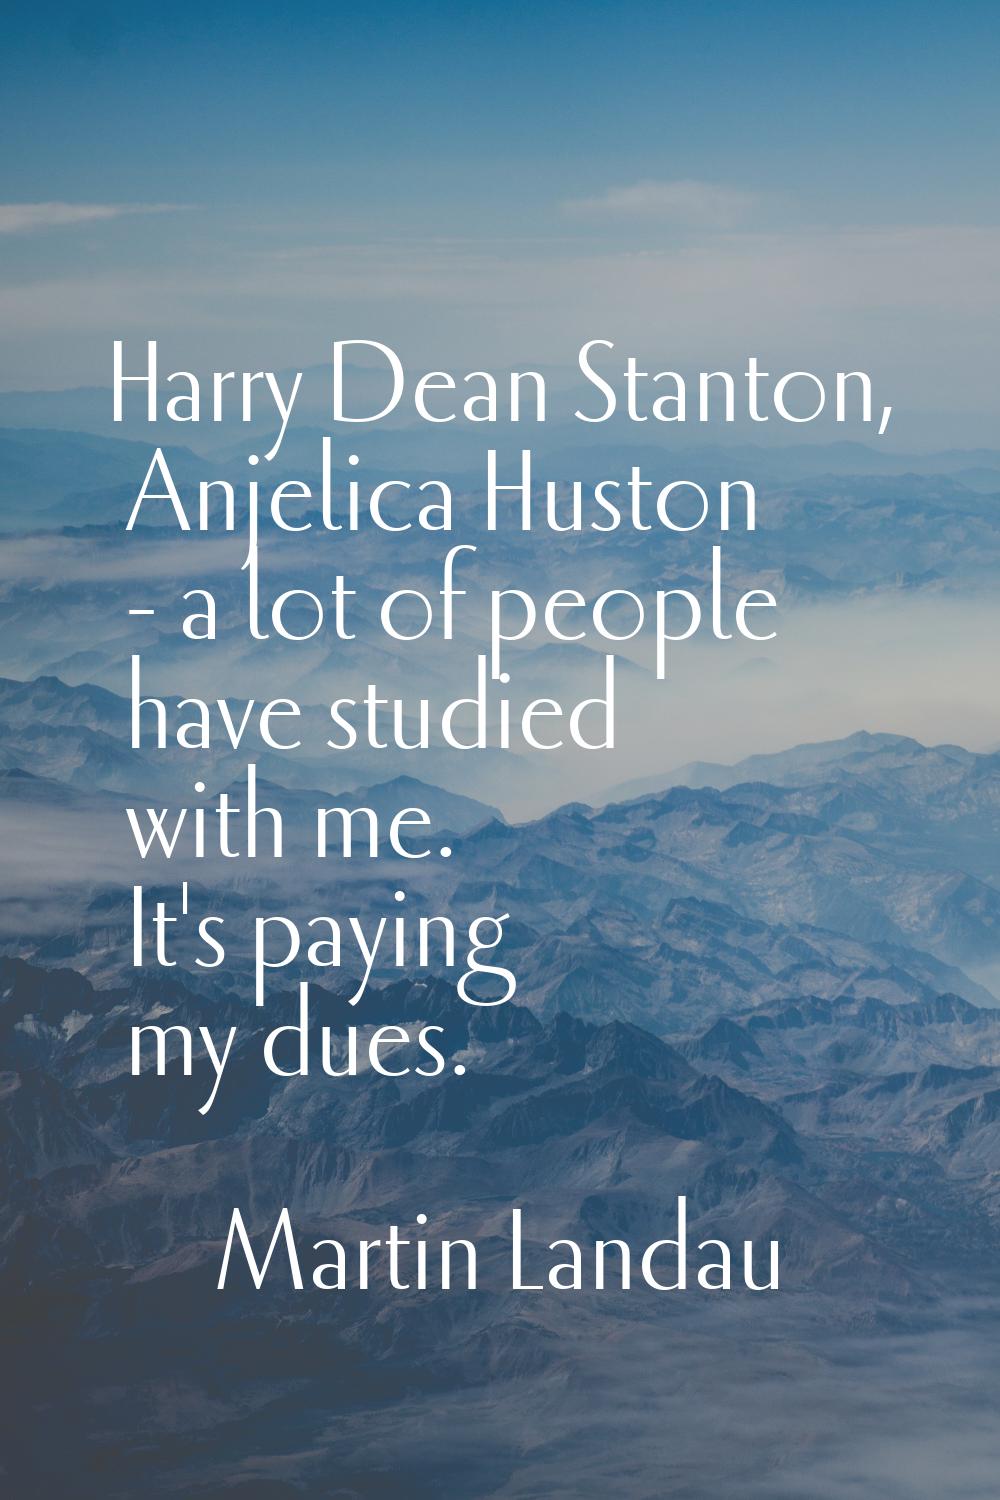 Harry Dean Stanton, Anjelica Huston - a lot of people have studied with me. It's paying my dues.